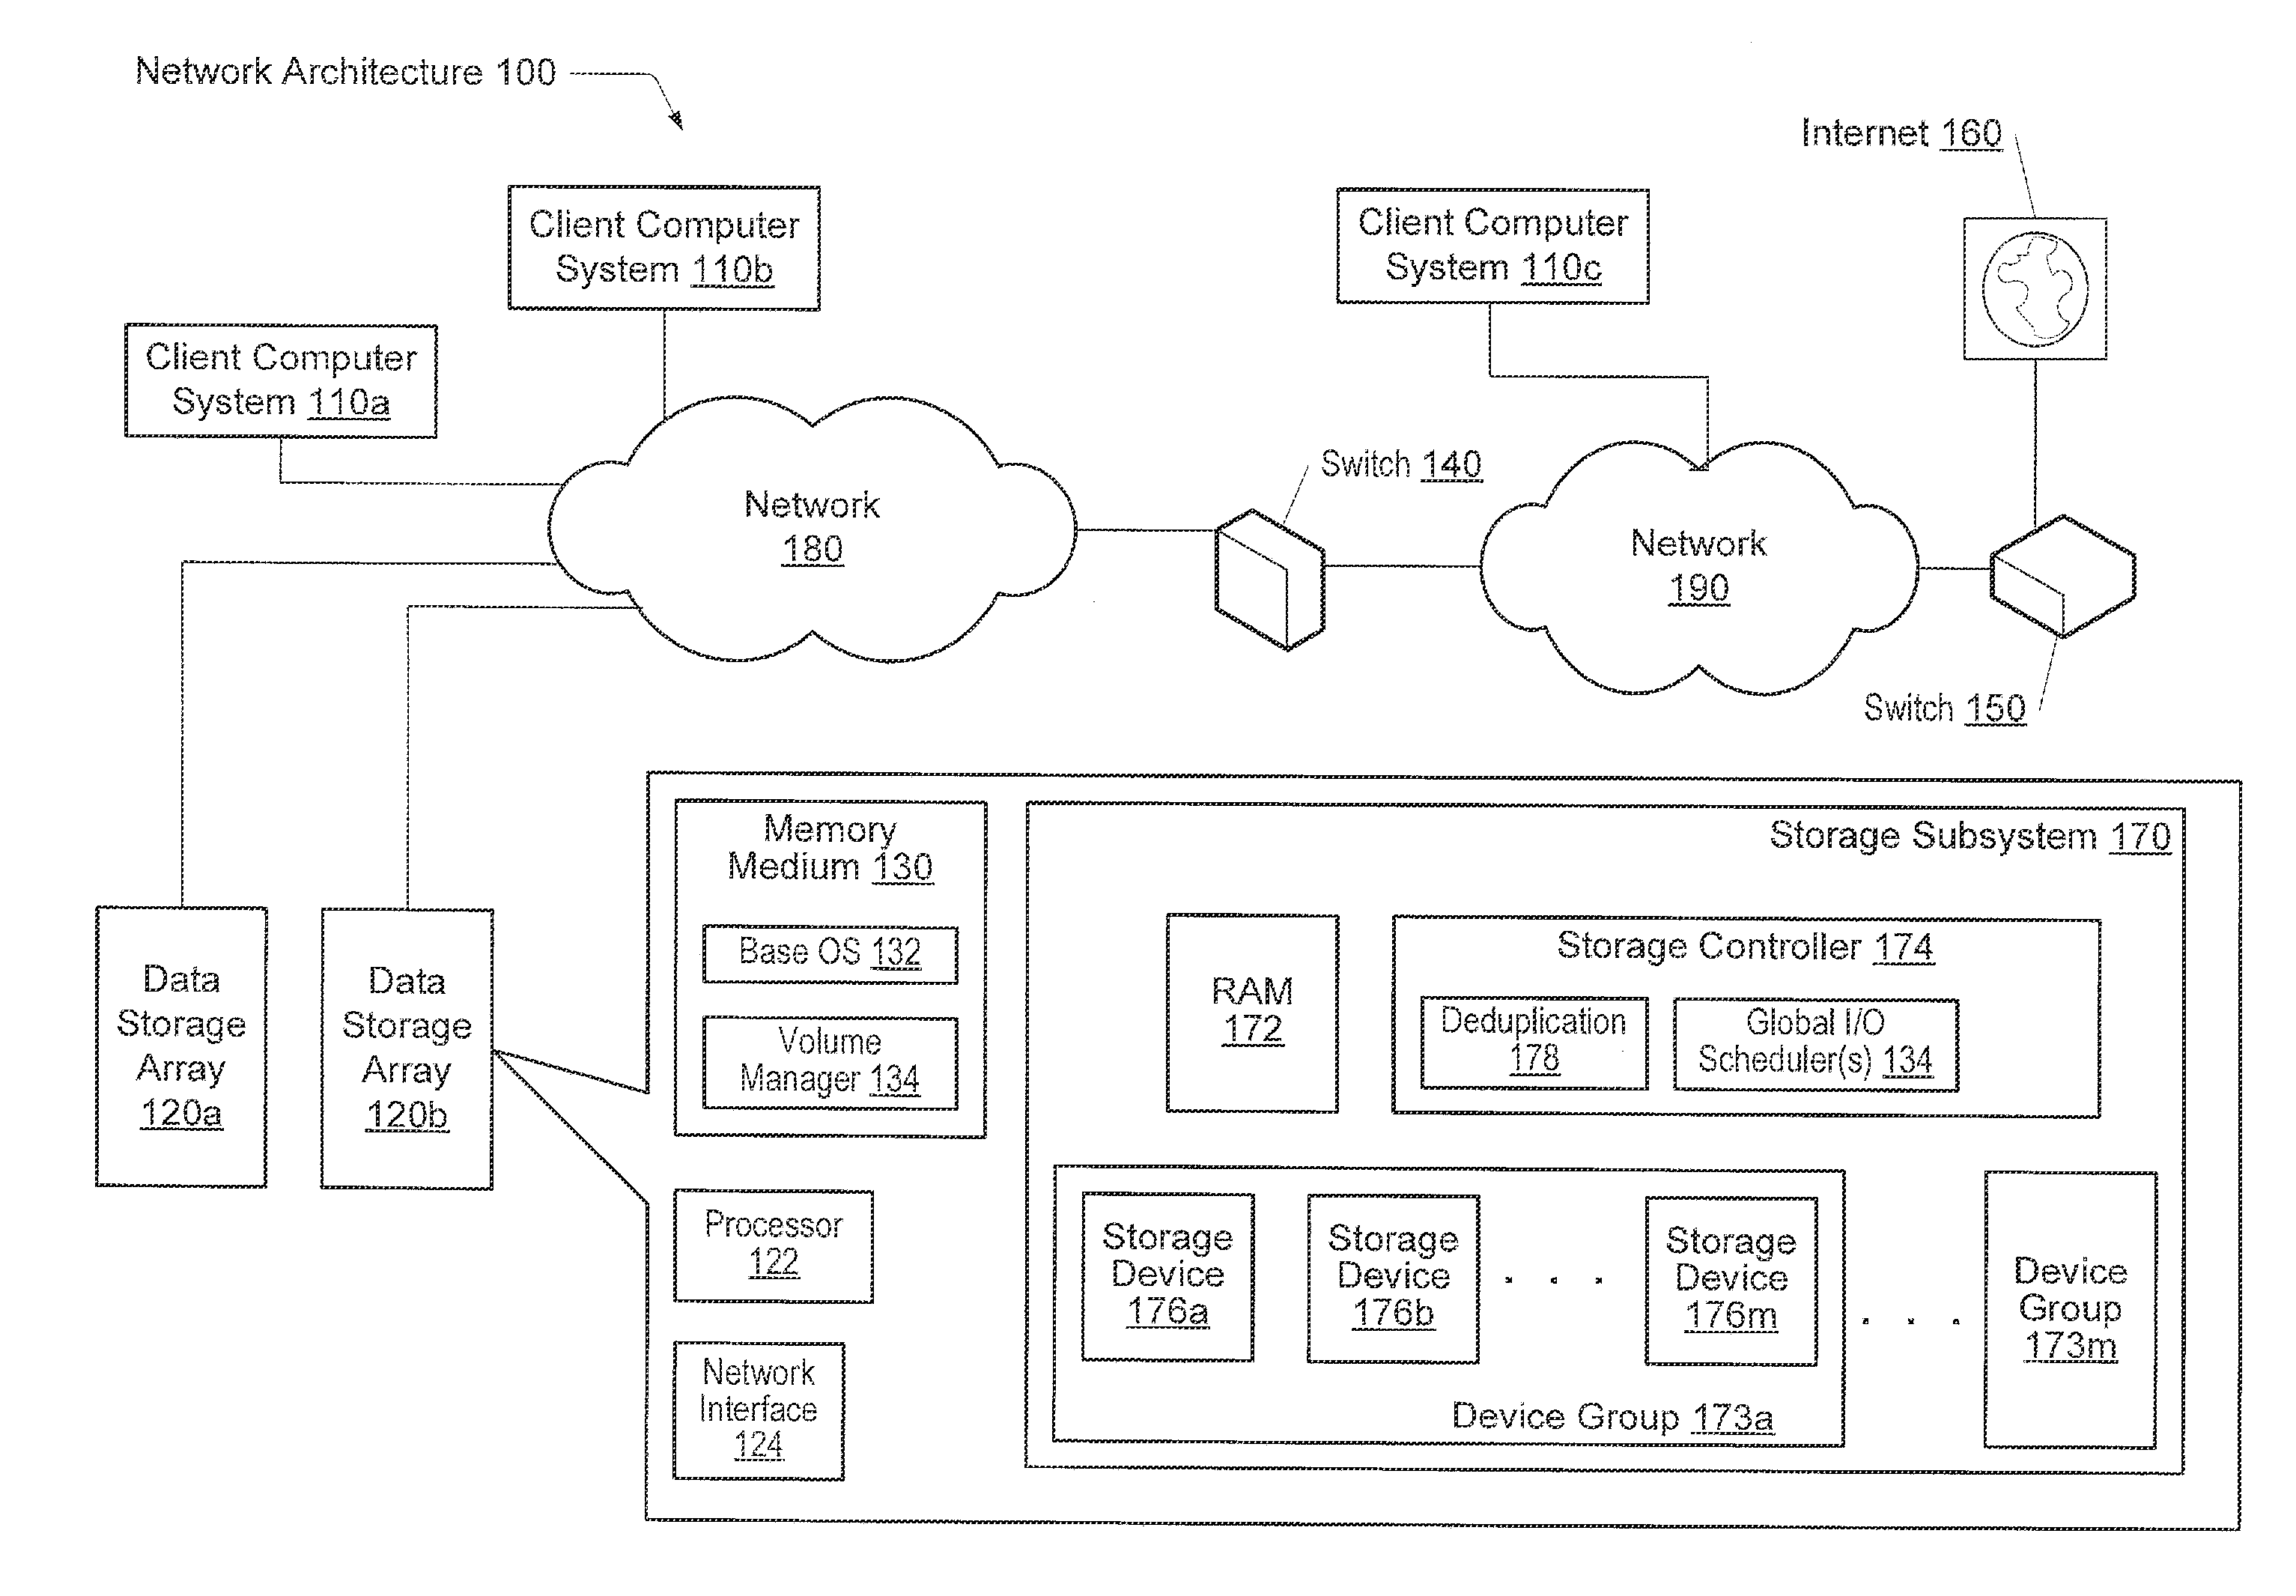 Garbage collection in a storage system